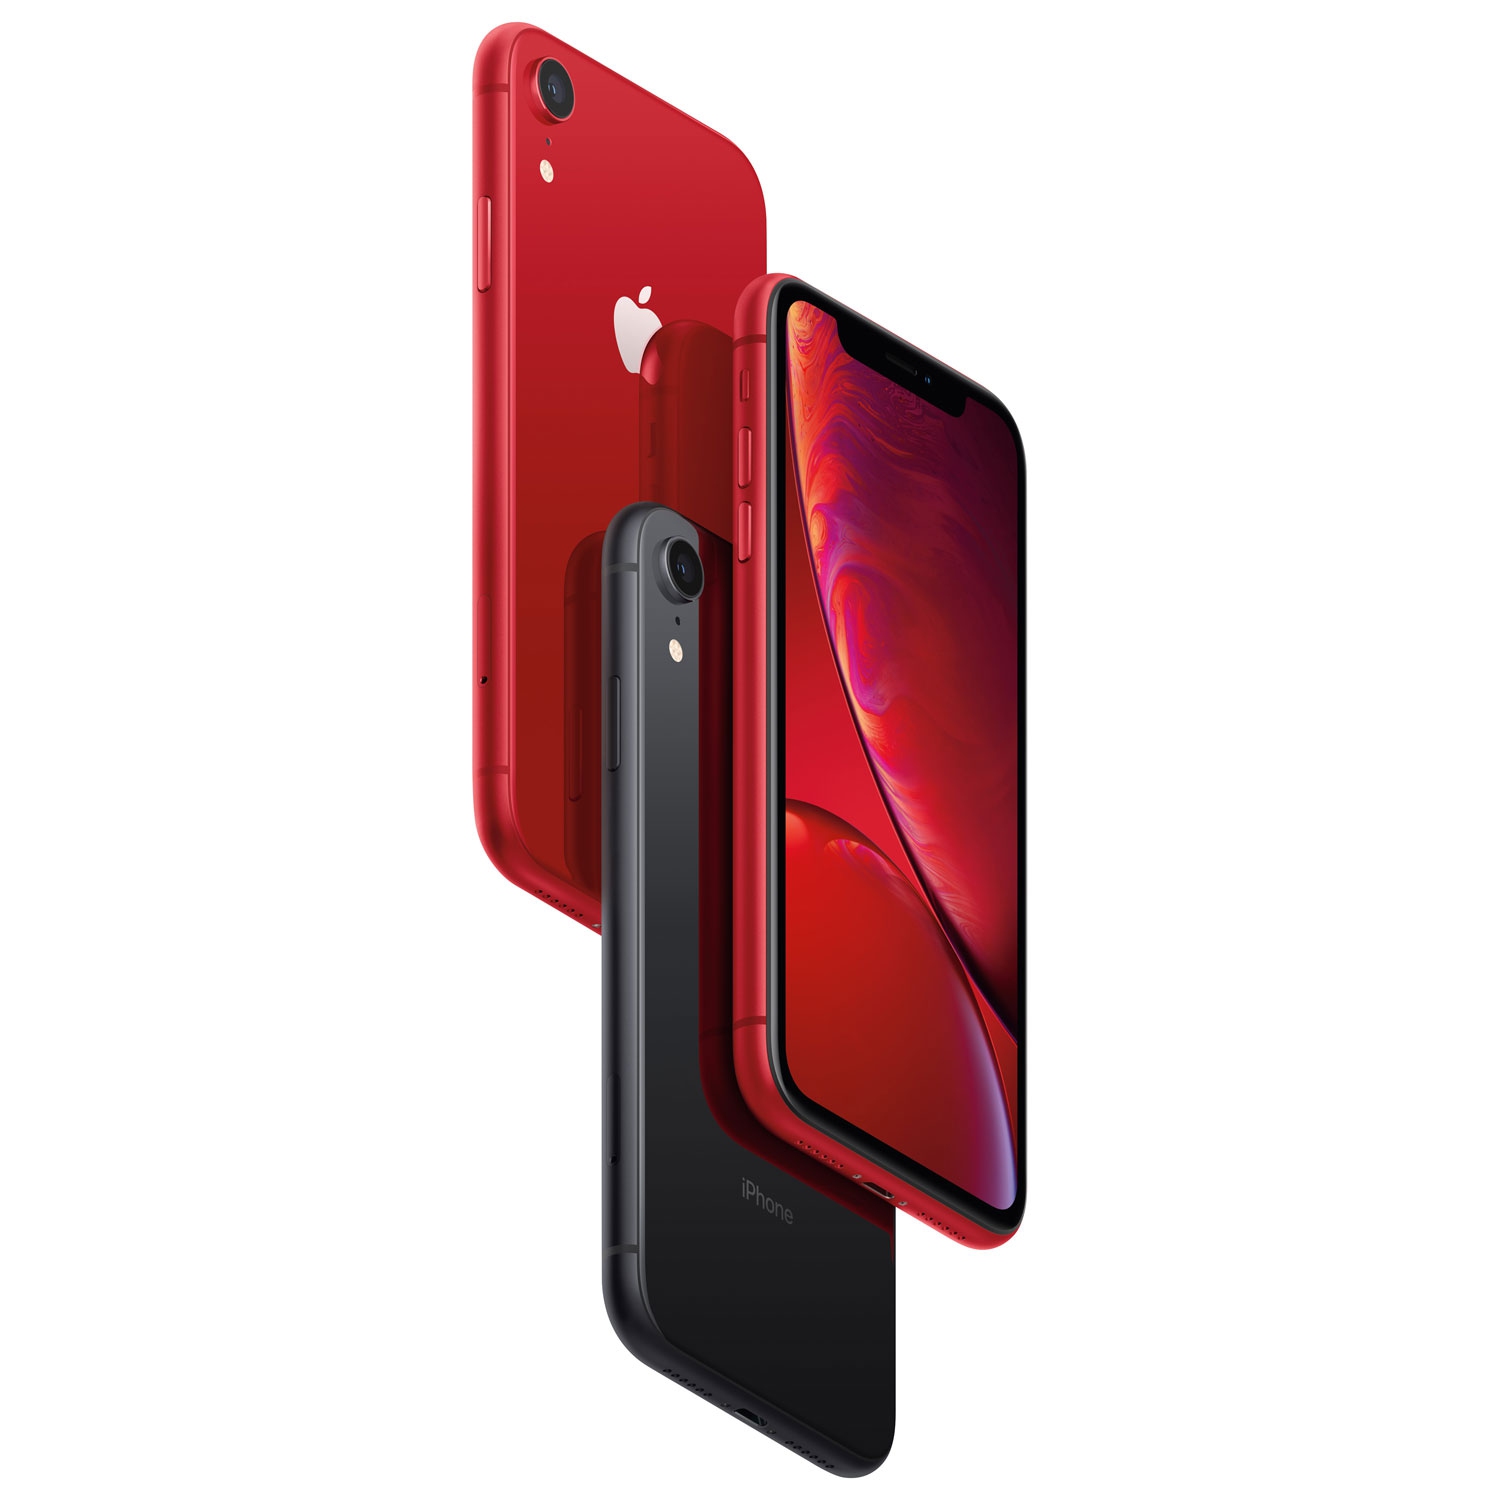 Refurbished (Excellent) - Apple iPhone XR 64GB Smartphone - (Product)RED -  Unlocked - Certified Refurbished